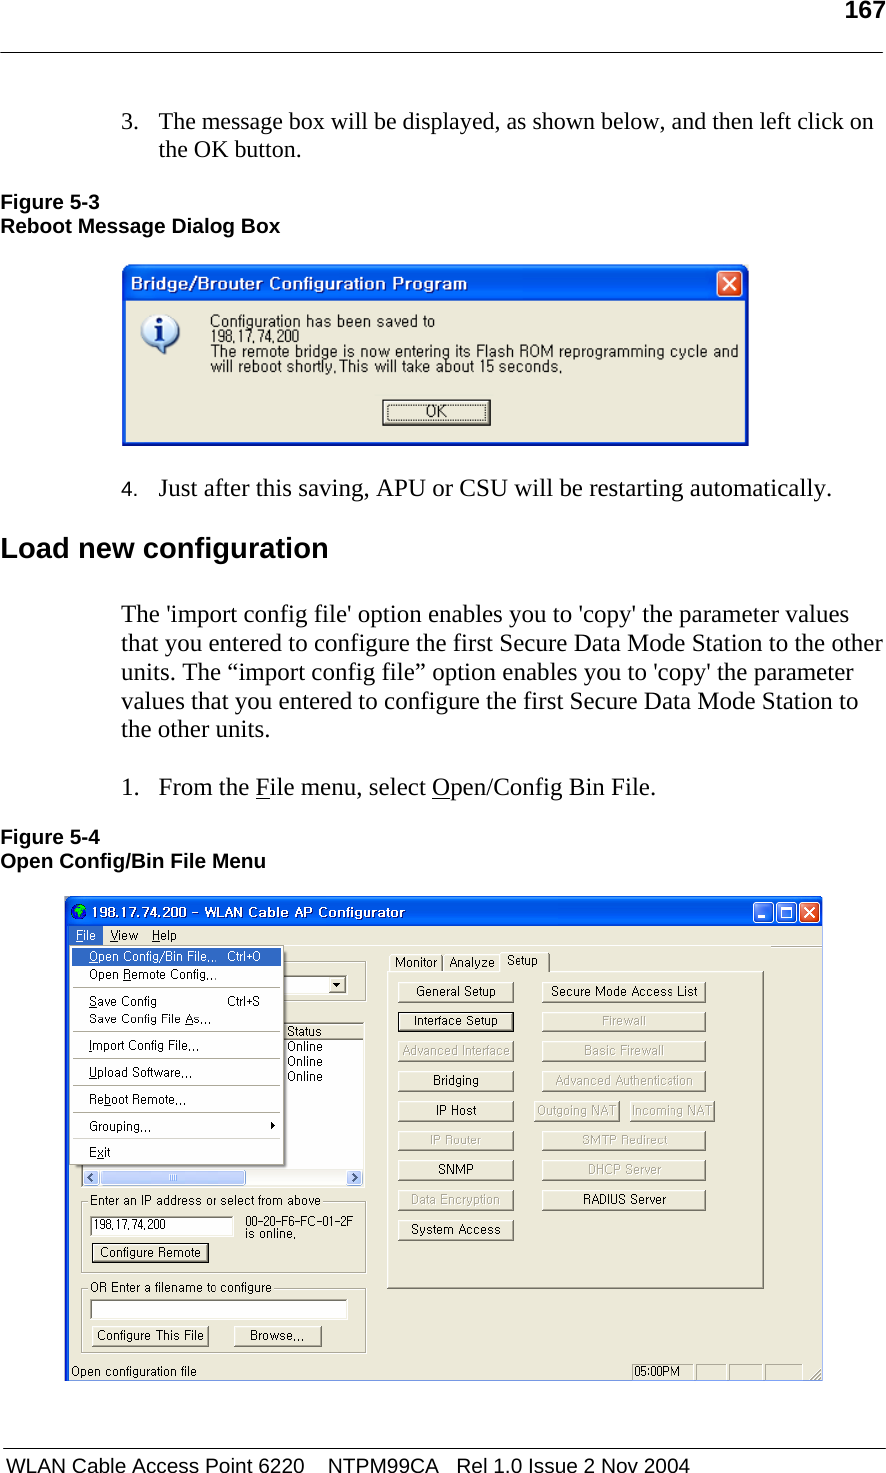   167   WLAN Cable Access Point 6220    NTPM99CA   Rel 1.0 Issue 2 Nov 2004 3. The message box will be displayed, as shown below, and then left click on the OK button.  Figure 5-3 Reboot Message Dialog Box    4.  Just after this saving, APU or CSU will be restarting automatically.  Load new configuration  The &apos;import config file&apos; option enables you to &apos;copy&apos; the parameter values that you entered to configure the first Secure Data Mode Station to the other units. The “import config file” option enables you to &apos;copy&apos; the parameter values that you entered to configure the first Secure Data Mode Station to the other units.  1. From the File menu, select Open/Config Bin File.  Figure 5-4 Open Config/Bin File Menu    